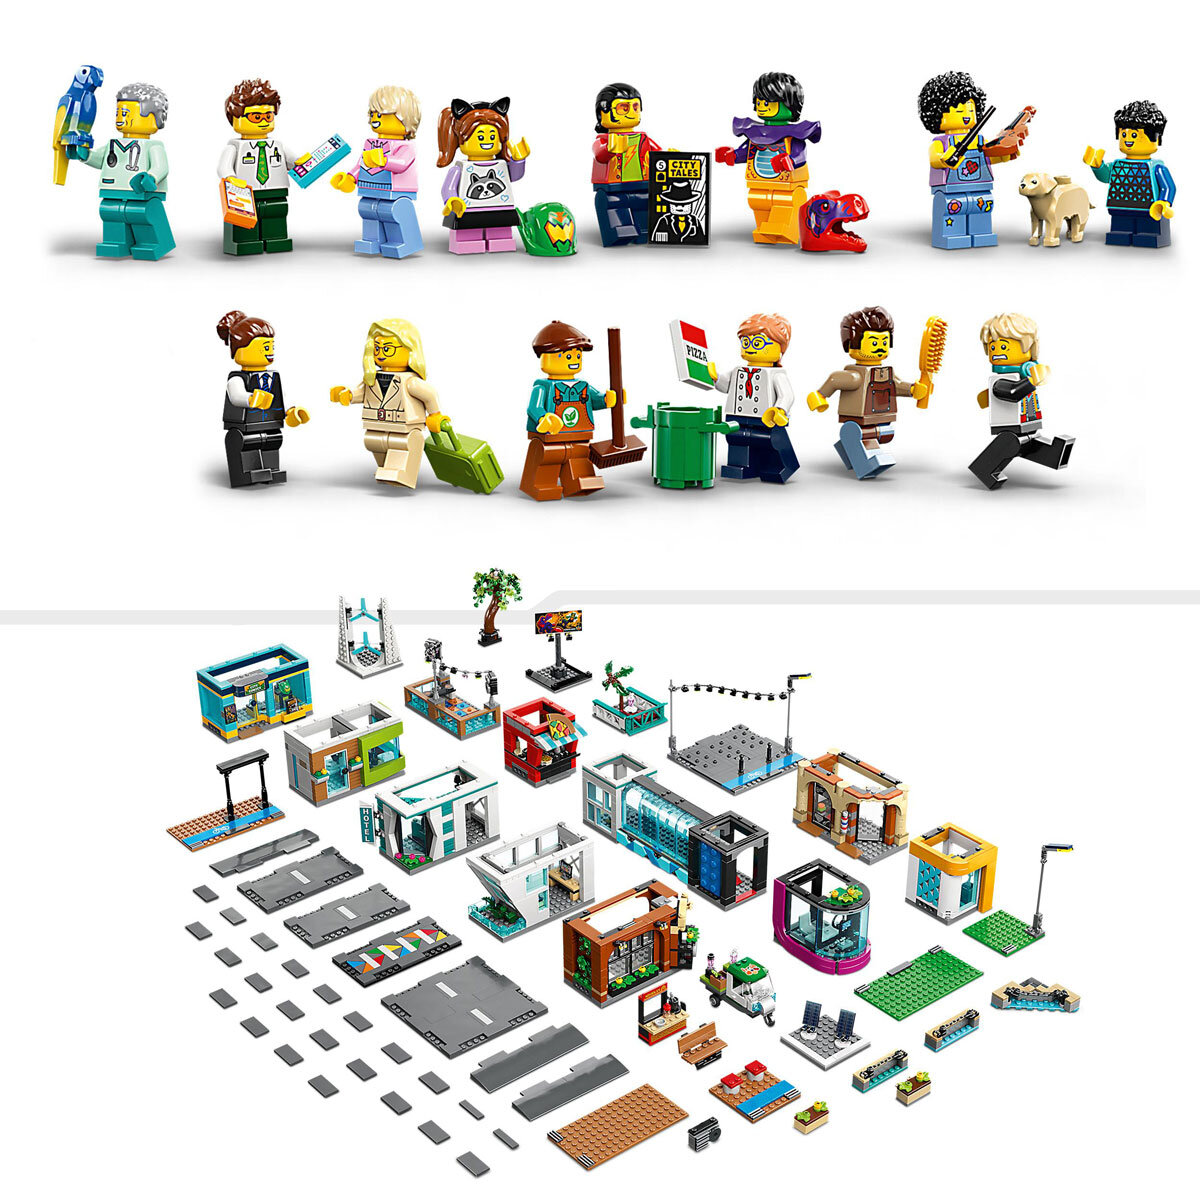 Buy LEGO CIty Centre Feature2 Image at Costco.co.uk